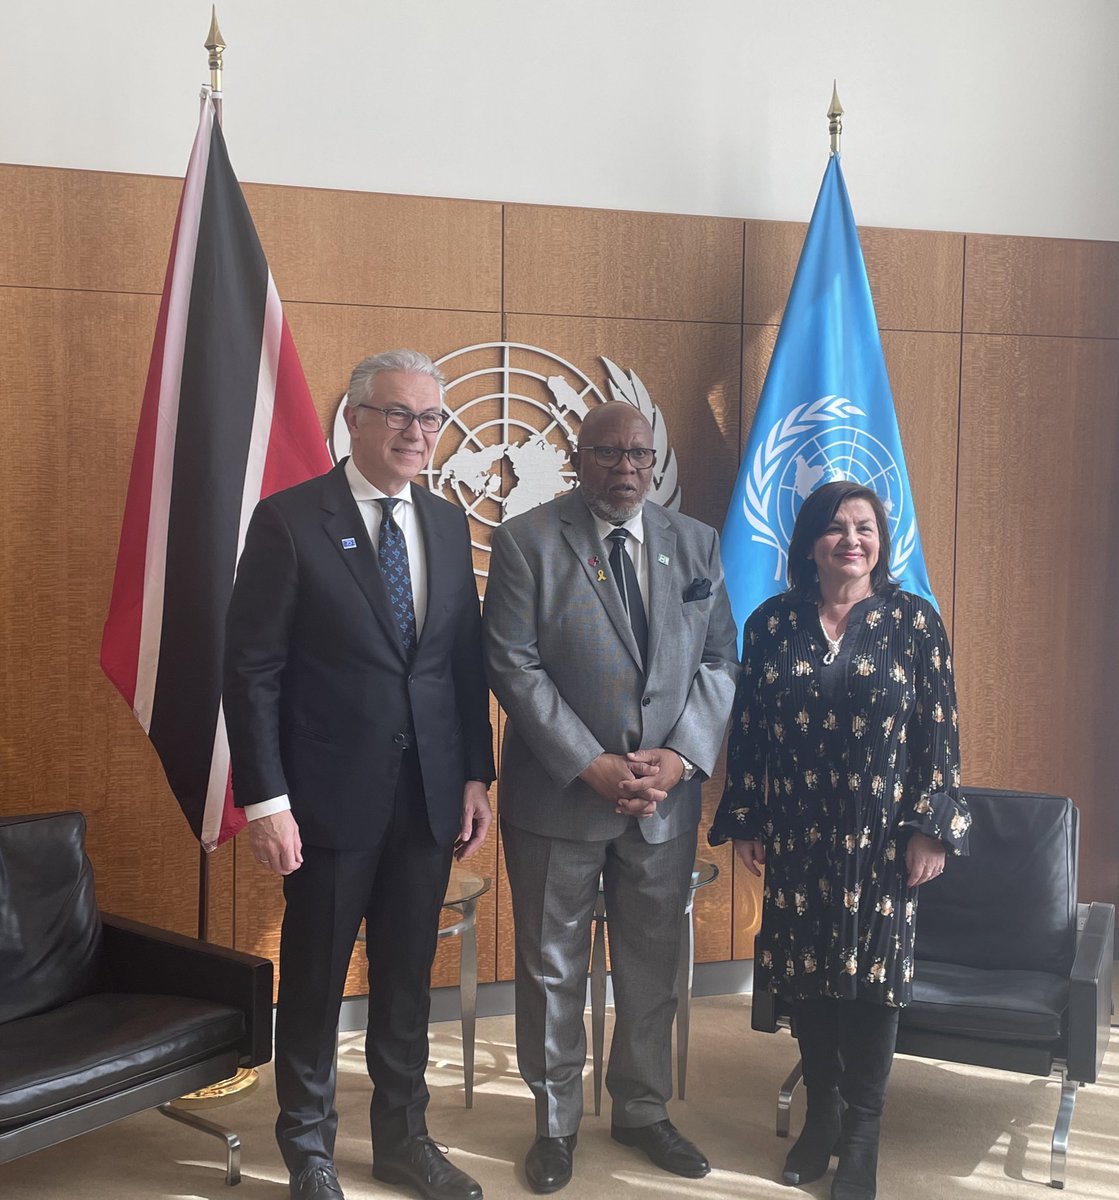 Global challenges require global solutions and international organisations should develop effective synergies to address them as we concluded during the exchange with the President of the Mr Dennis Francis @UN_PGA today.